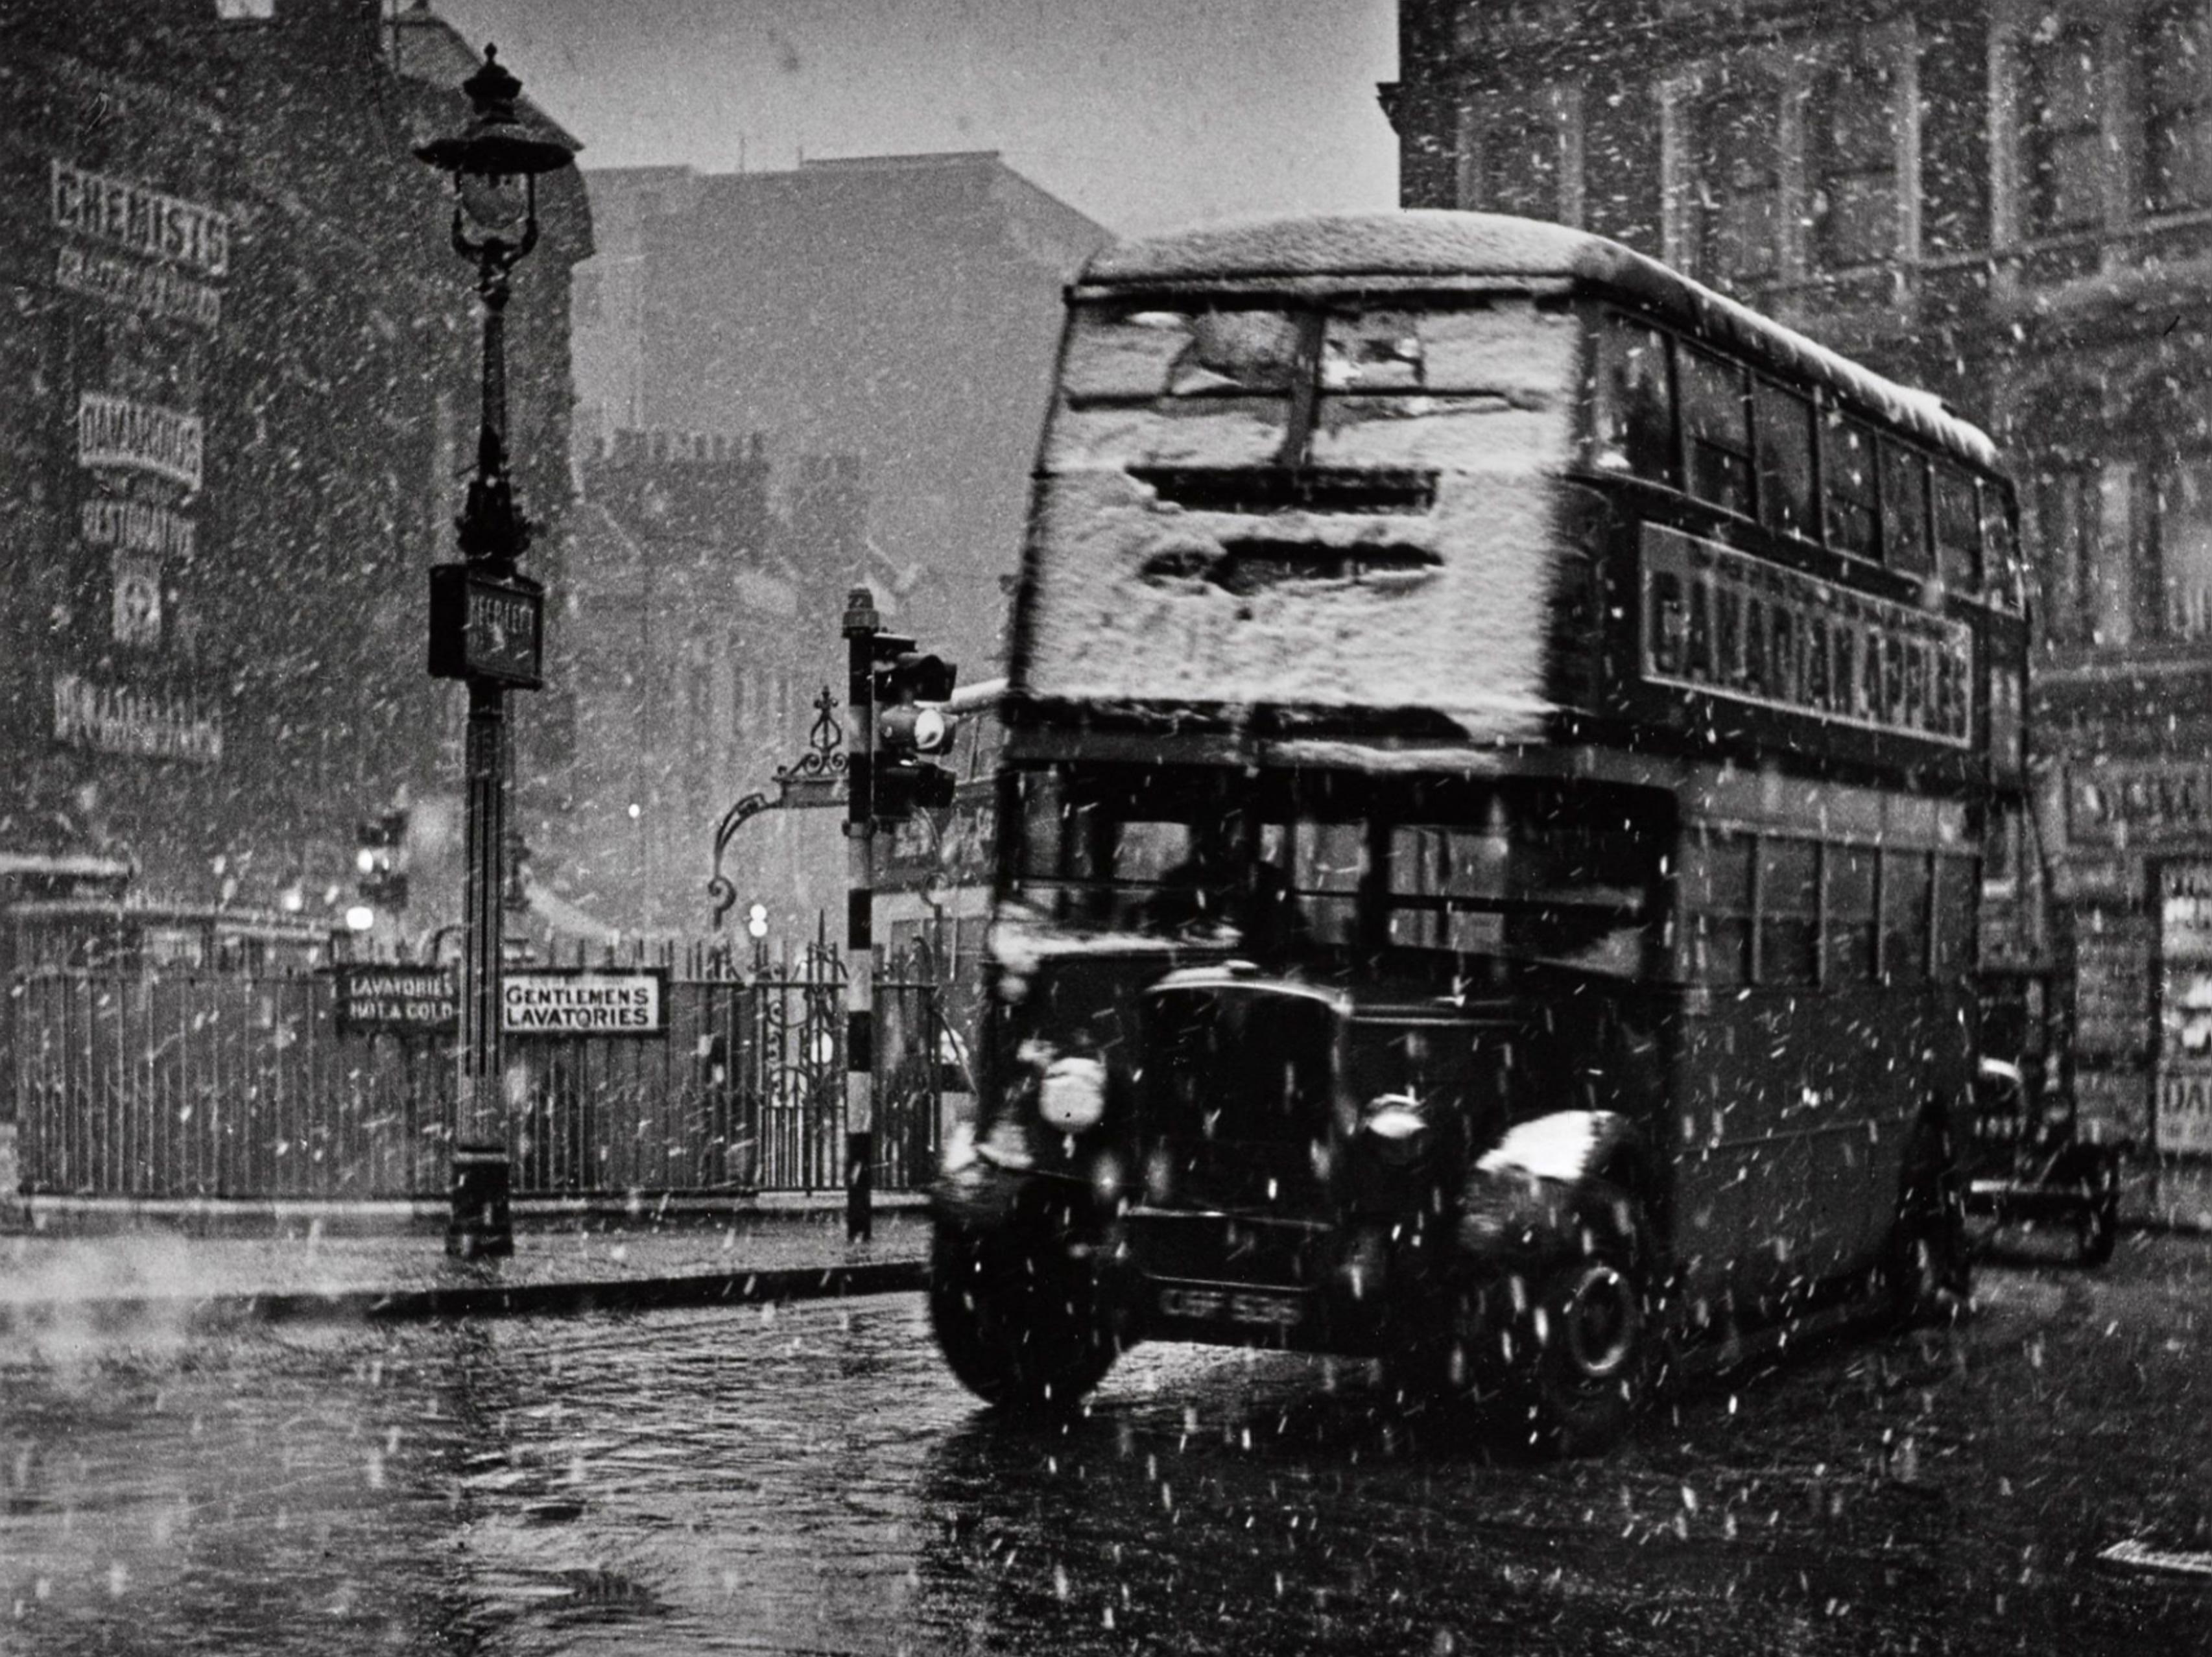 Wolfgang Suschitzky Landscape Photograph - View from Charing Cross Road towards Cambridge Circus, London